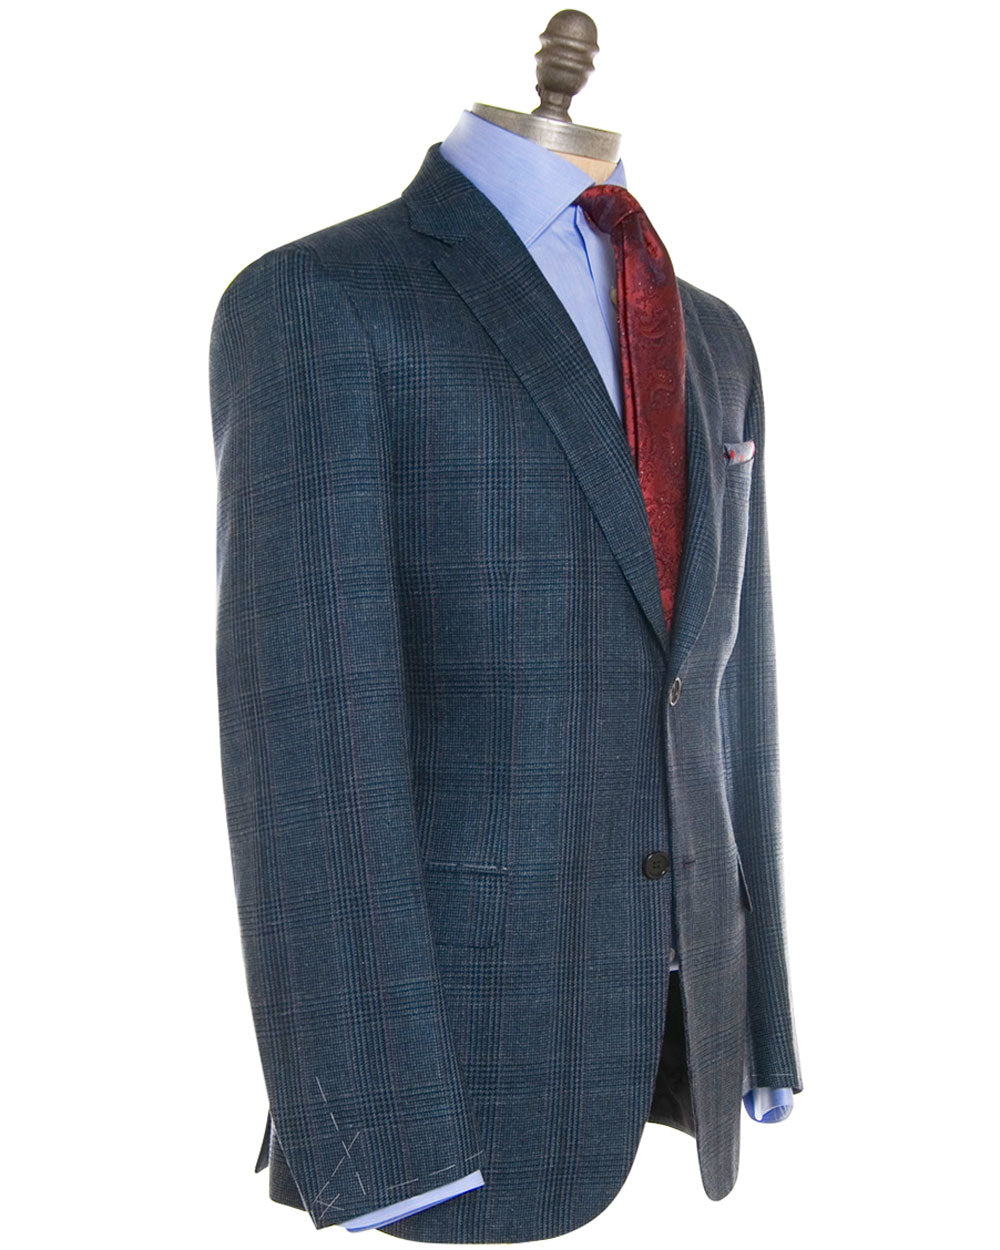 Teal and Rust Check Sportcoat